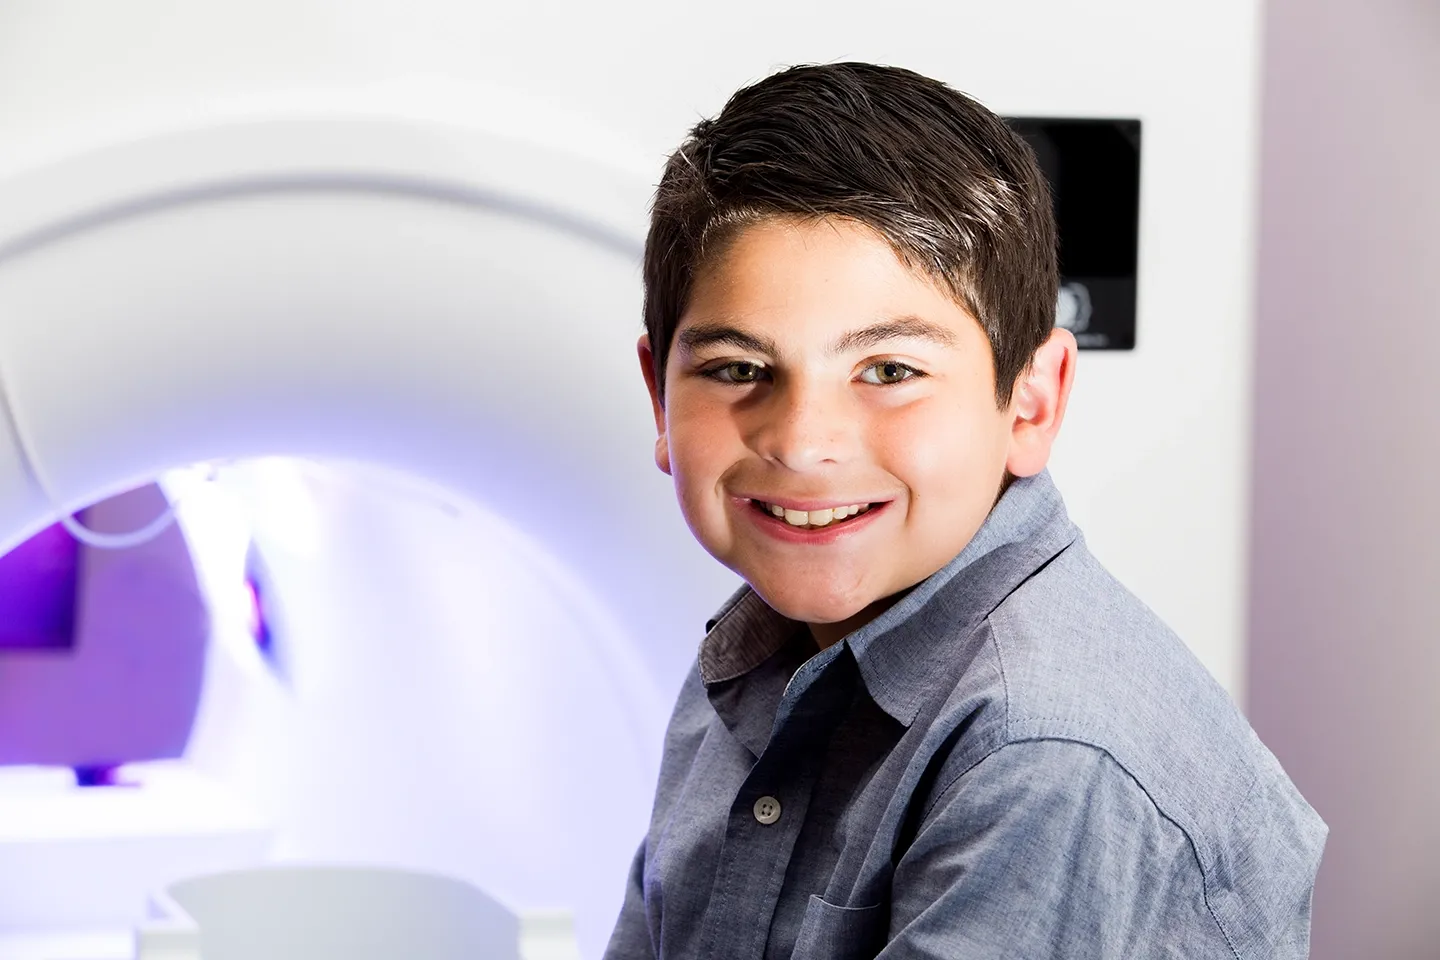 A young boy is smiling with an MRI scanner in the background.